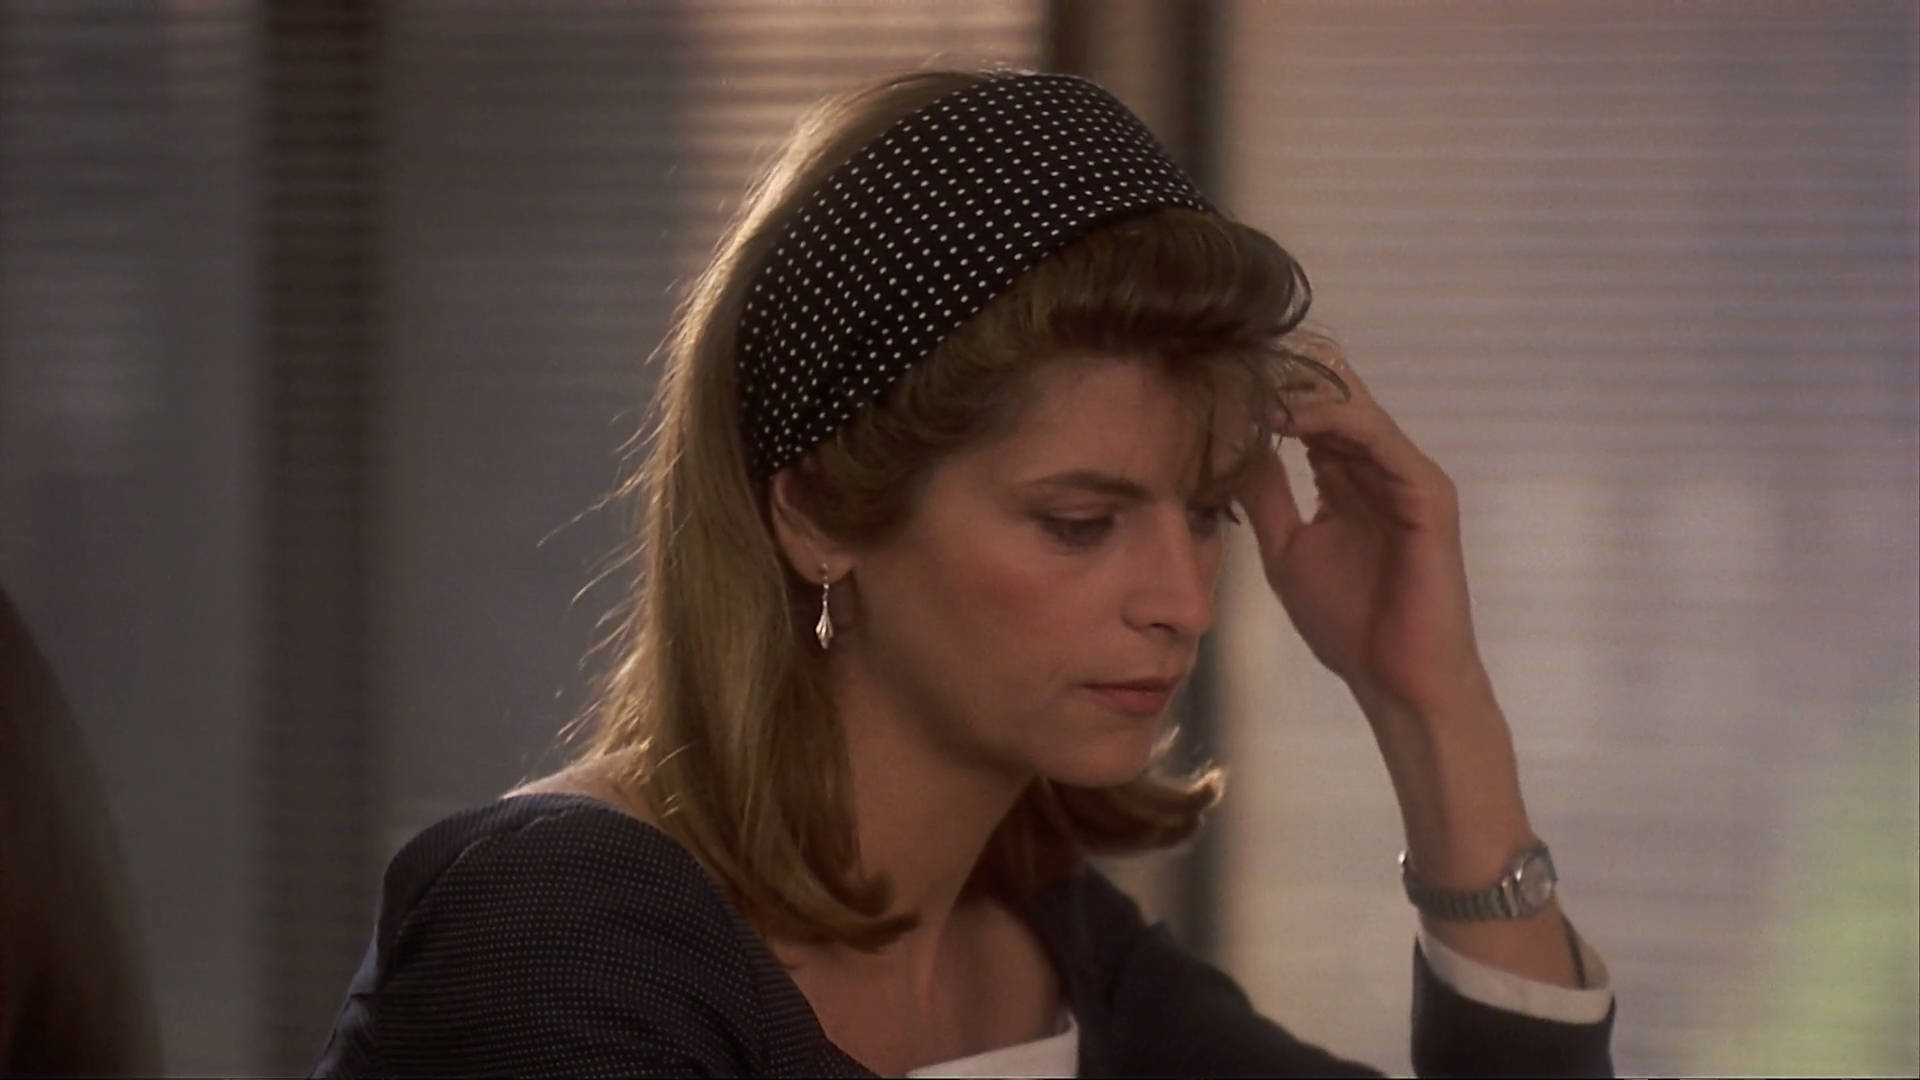 Kirstie Alley charmingly portraying the character Mollie in the hit film, Look Who's Talking Wallpaper